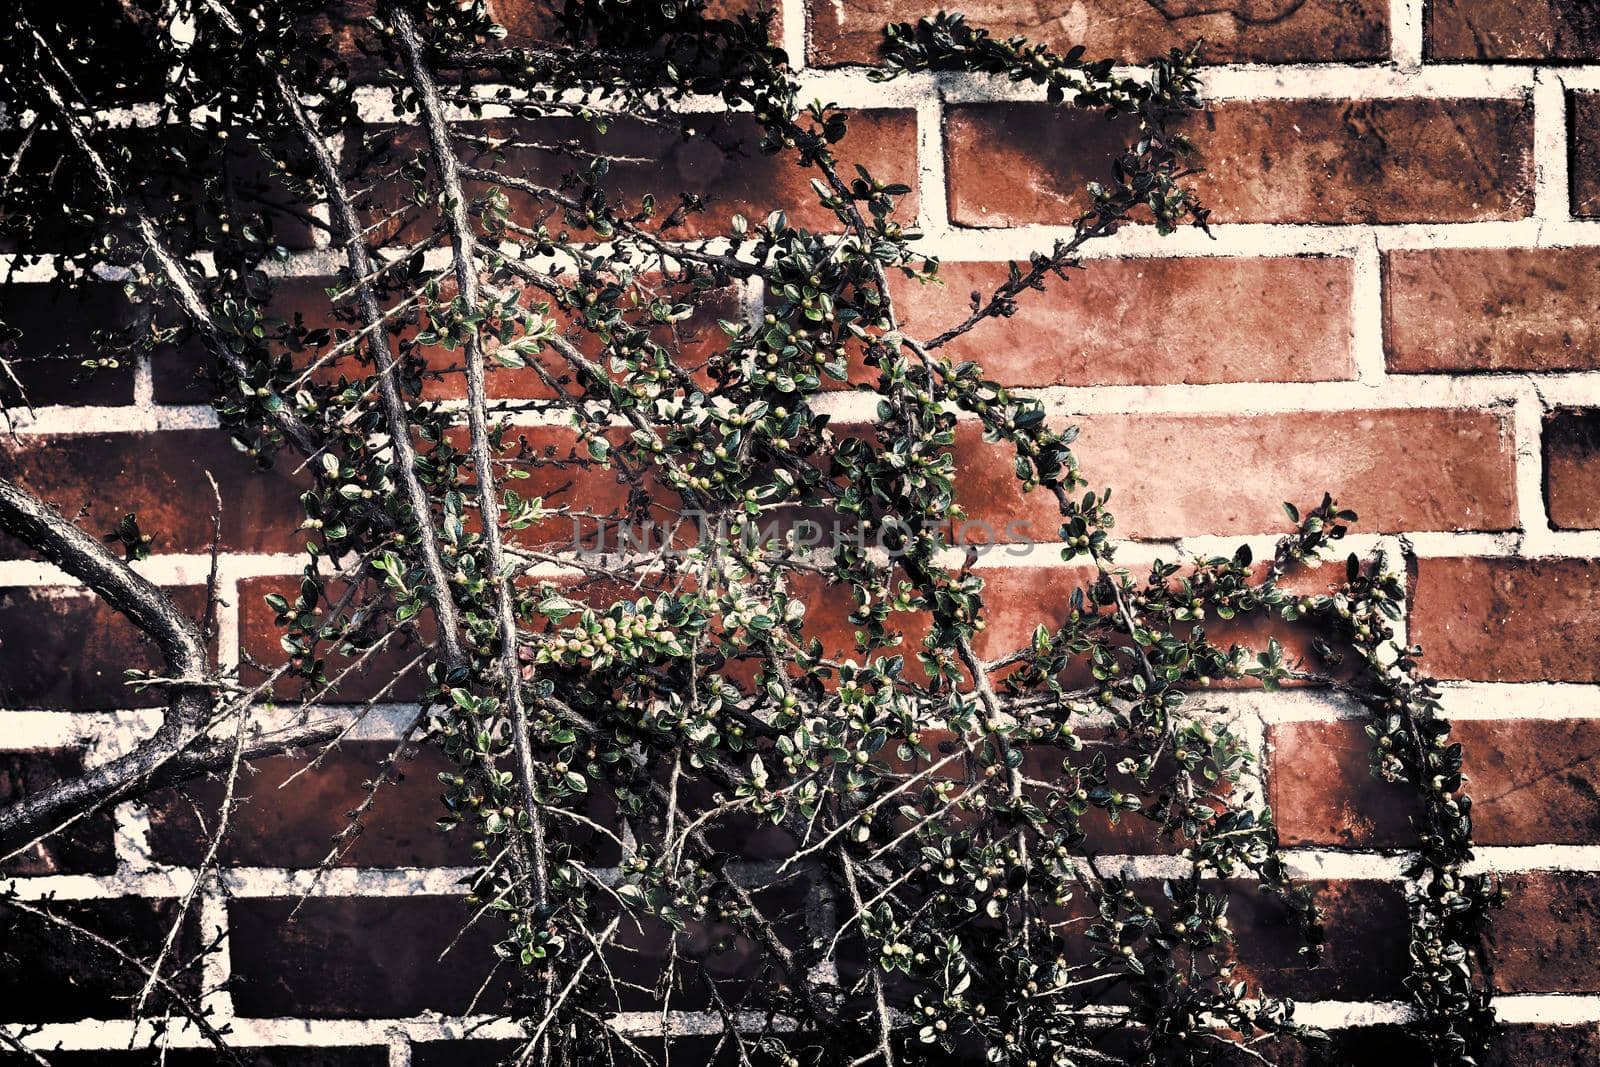 Aged and weathered old brick wall texture in a vintage retro design 